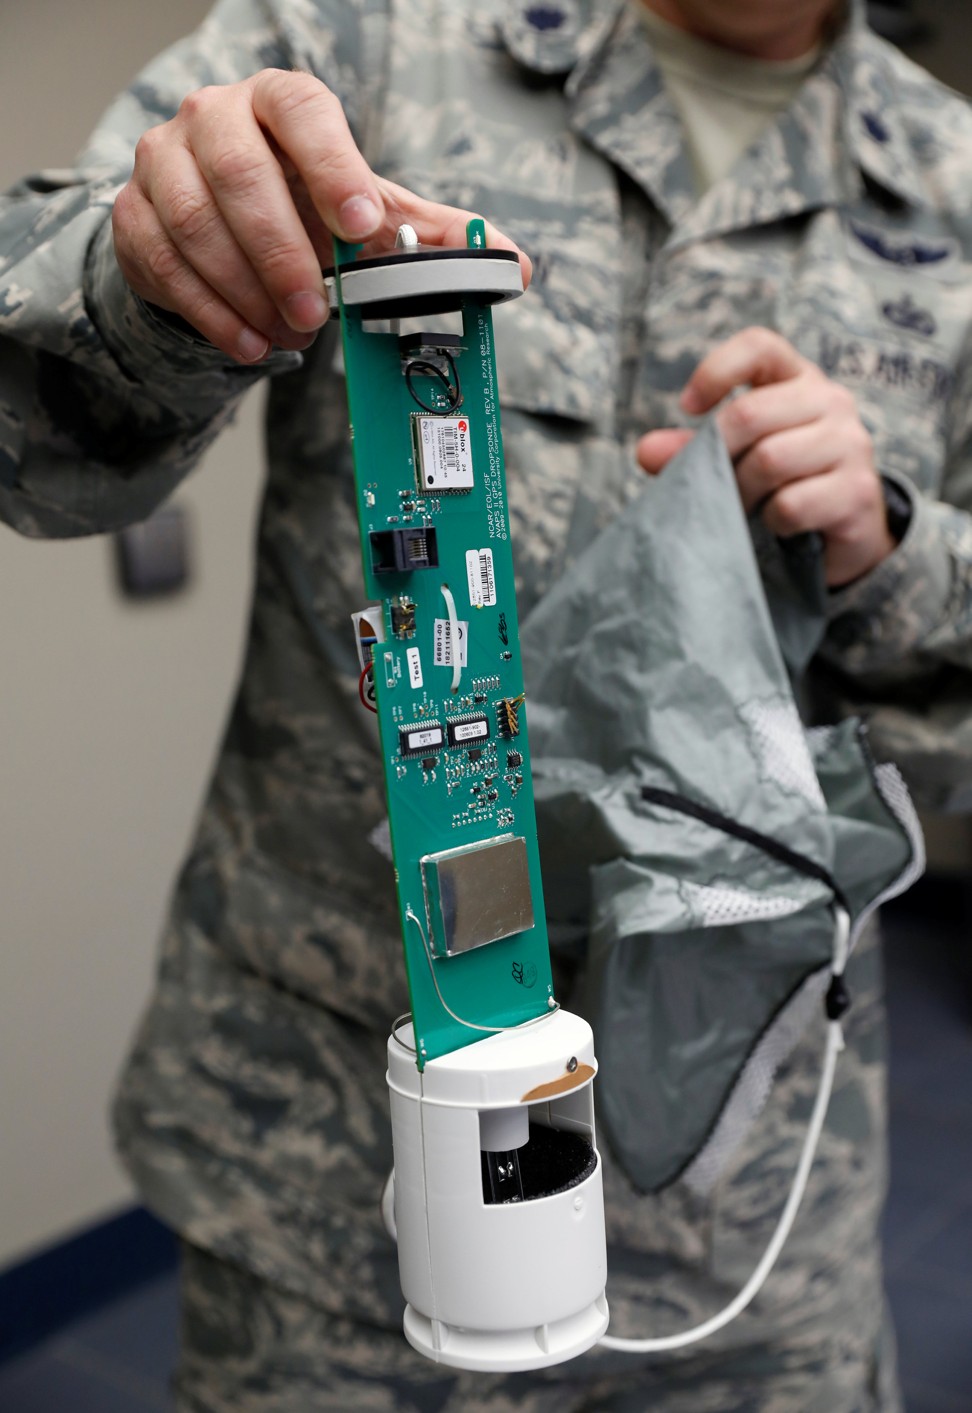 A US Air Force Reserves officer shows the inner workings of a dropsonde, a device dropped from planes to monitor meteorological data in a hurricane. Photo: Reuters